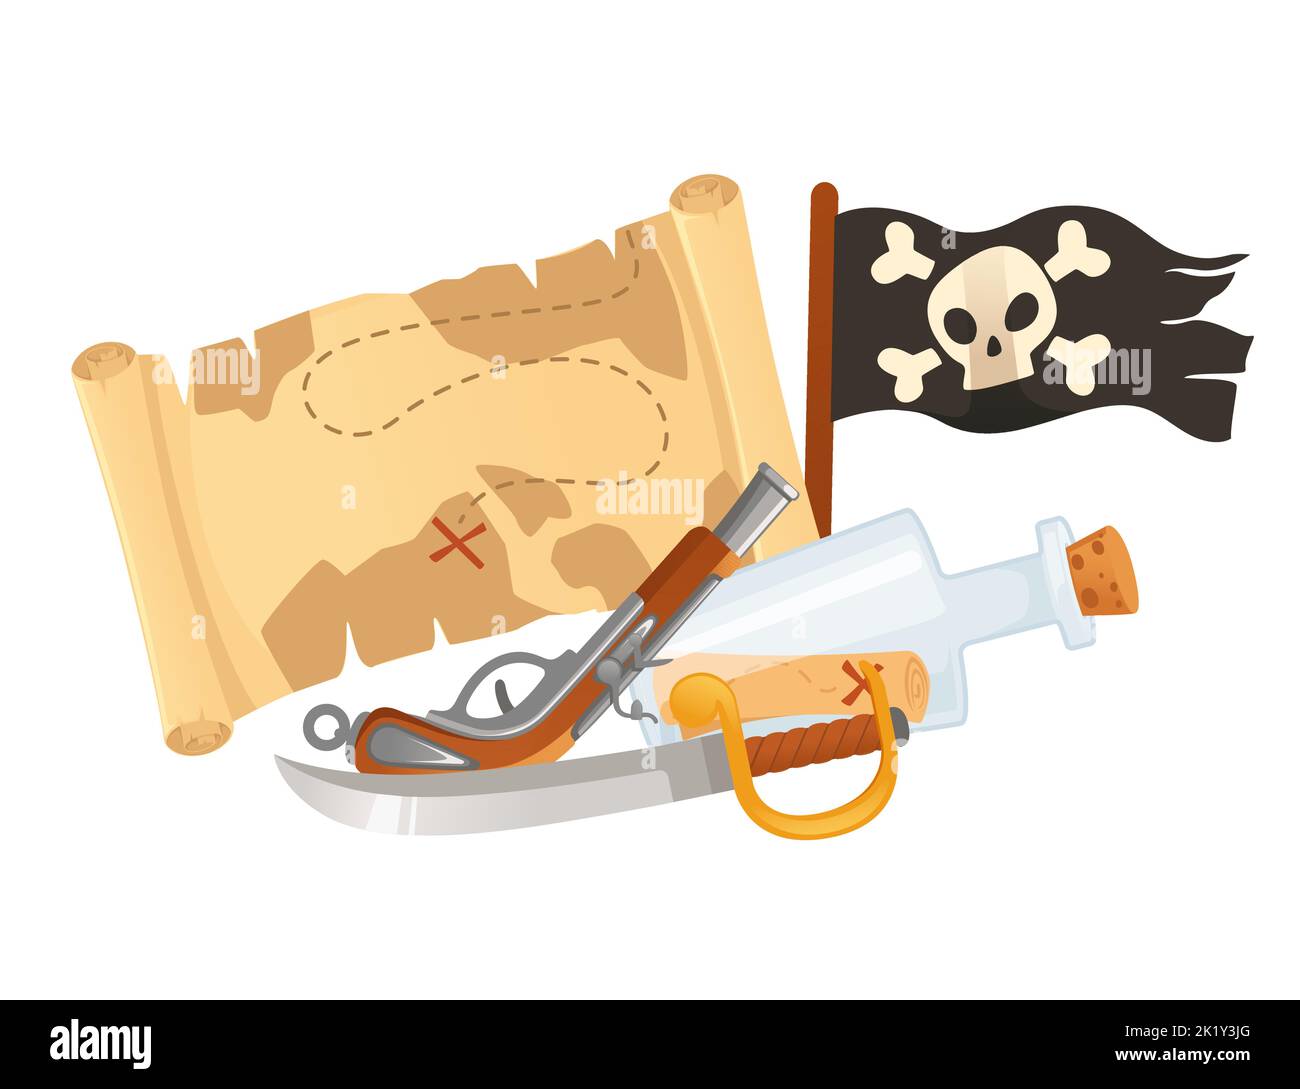 Illustration of pirate theme with treasure map flag and weapons vector illustration isolated on white background Stock Vector